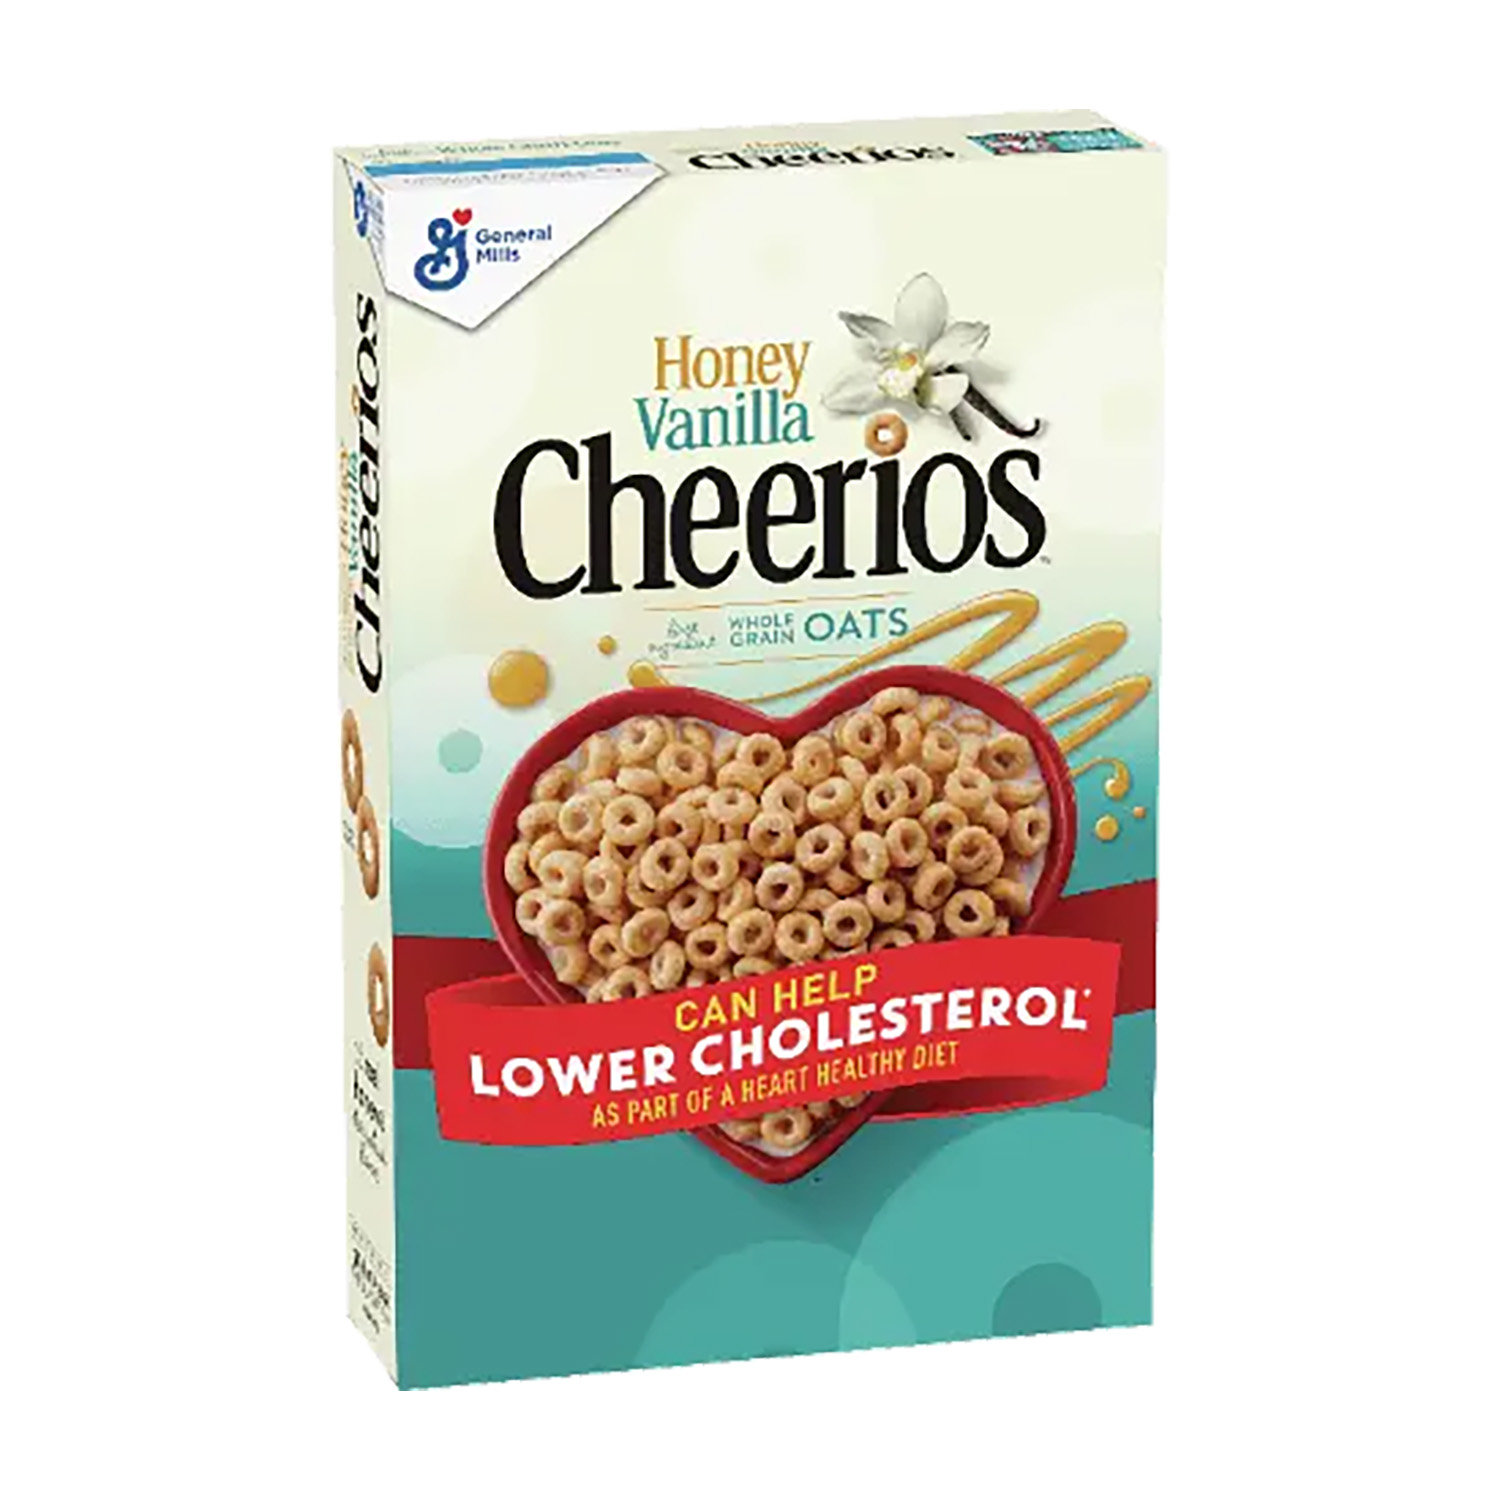 Cheerios, Frosted Cheerios & Honey Nut Cheerios Cereal Review